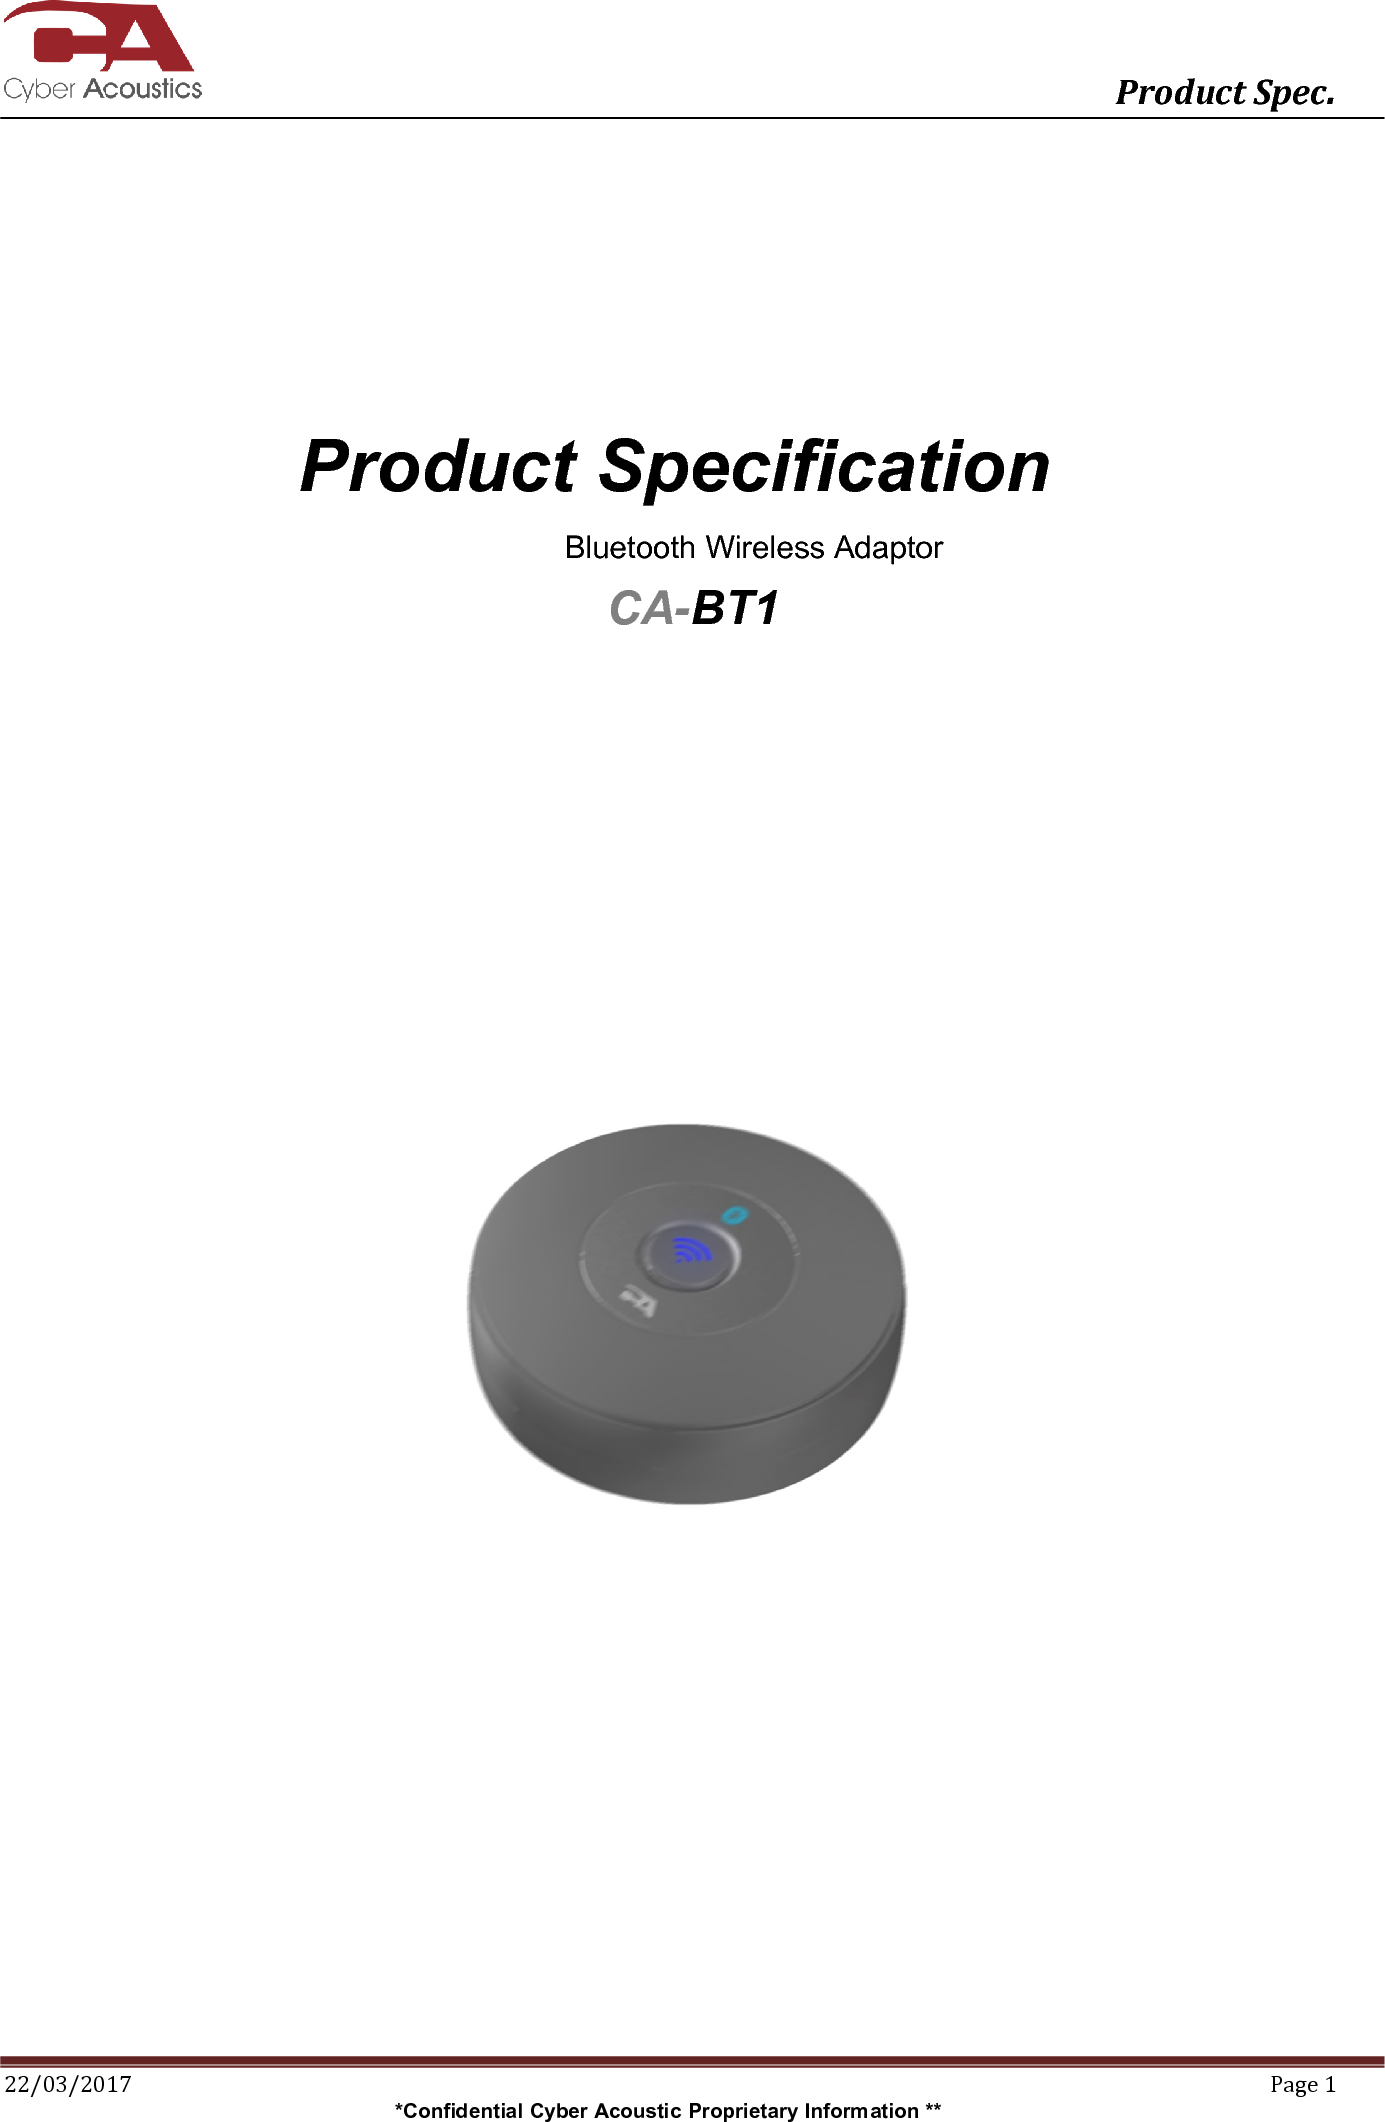       Product Spec. 22/03/2017  Page 1 *Confidential Cyber Acoustic Proprietary Information **          Product Specification        Bluetooth Wireless Adaptor CA-BT1       